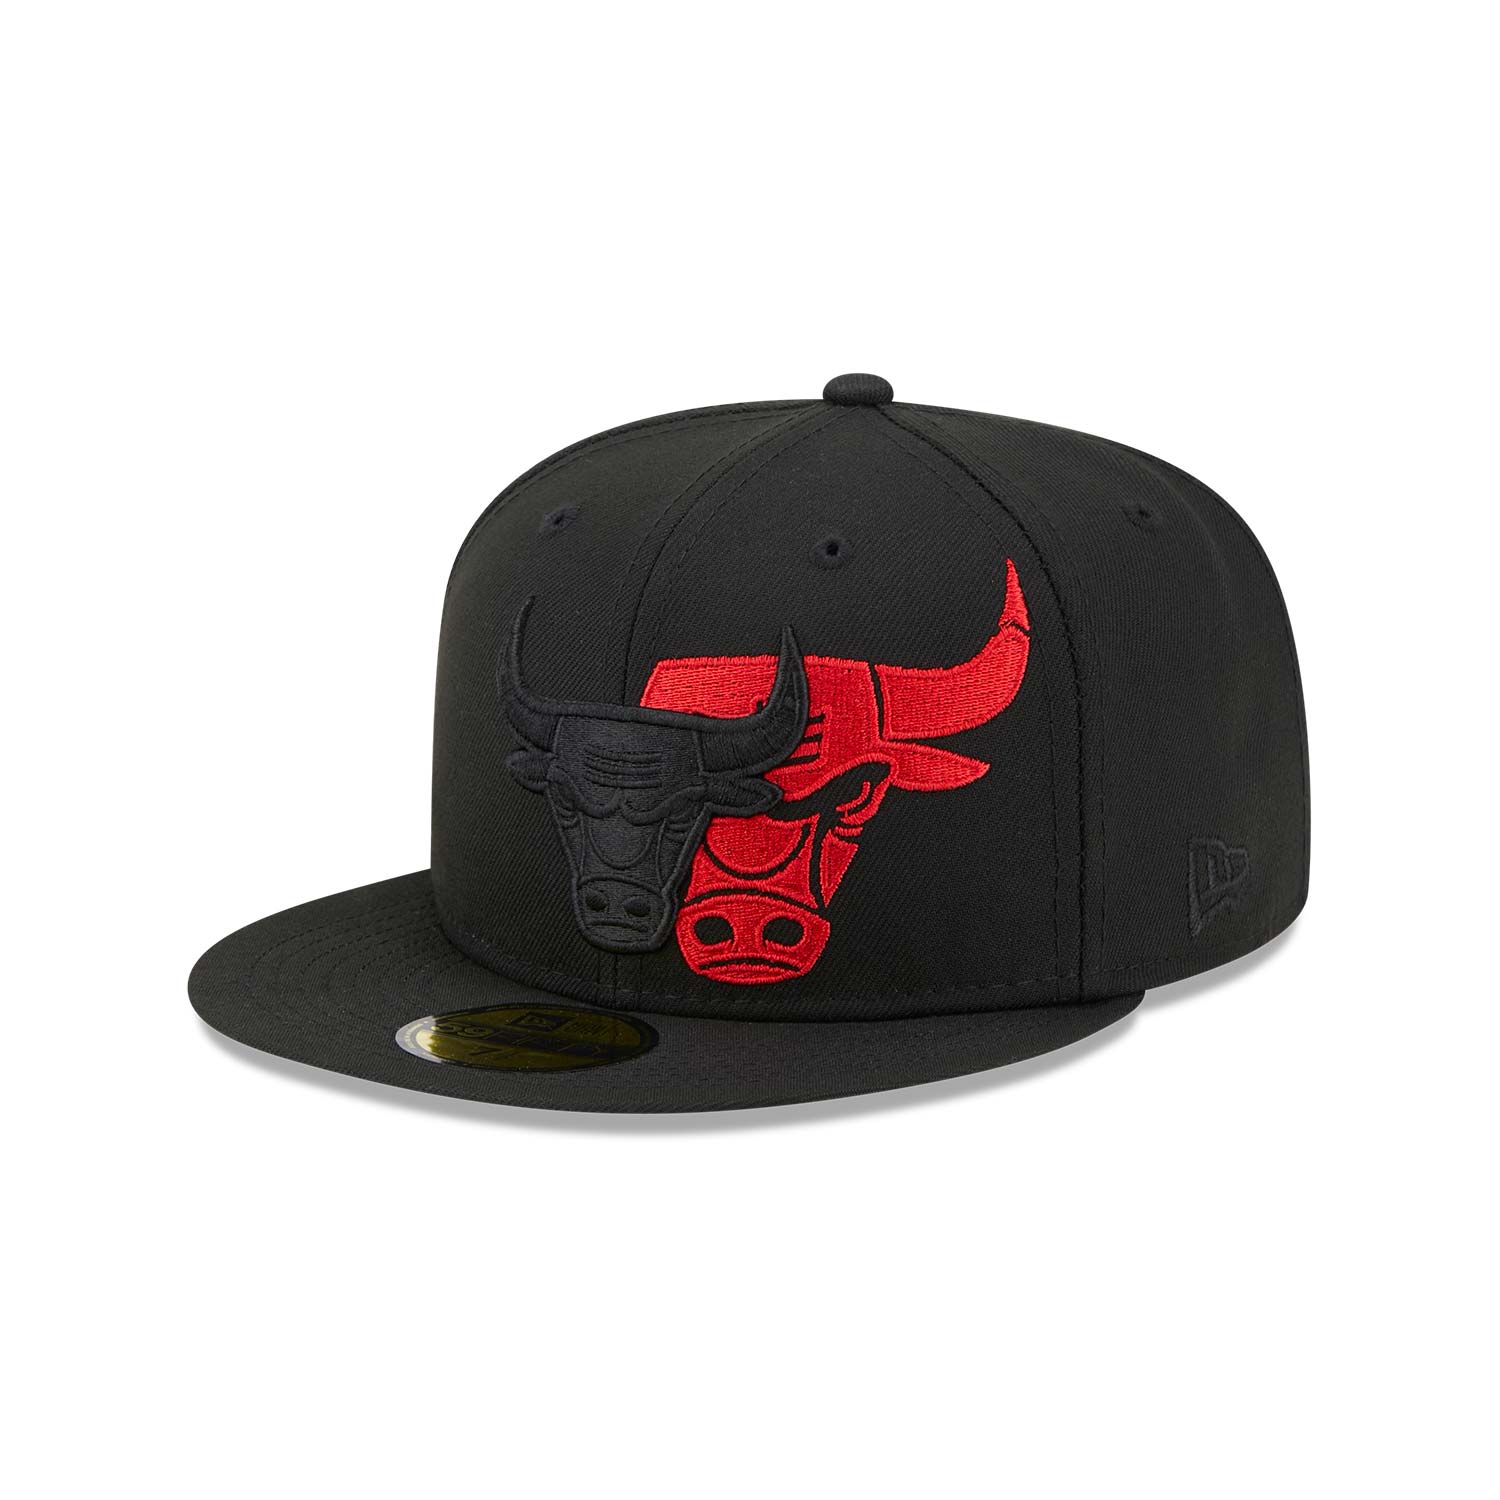 Official New Era NBA Elements Chicago Bulls 59FIFTY Fitted Cap B9900 ...